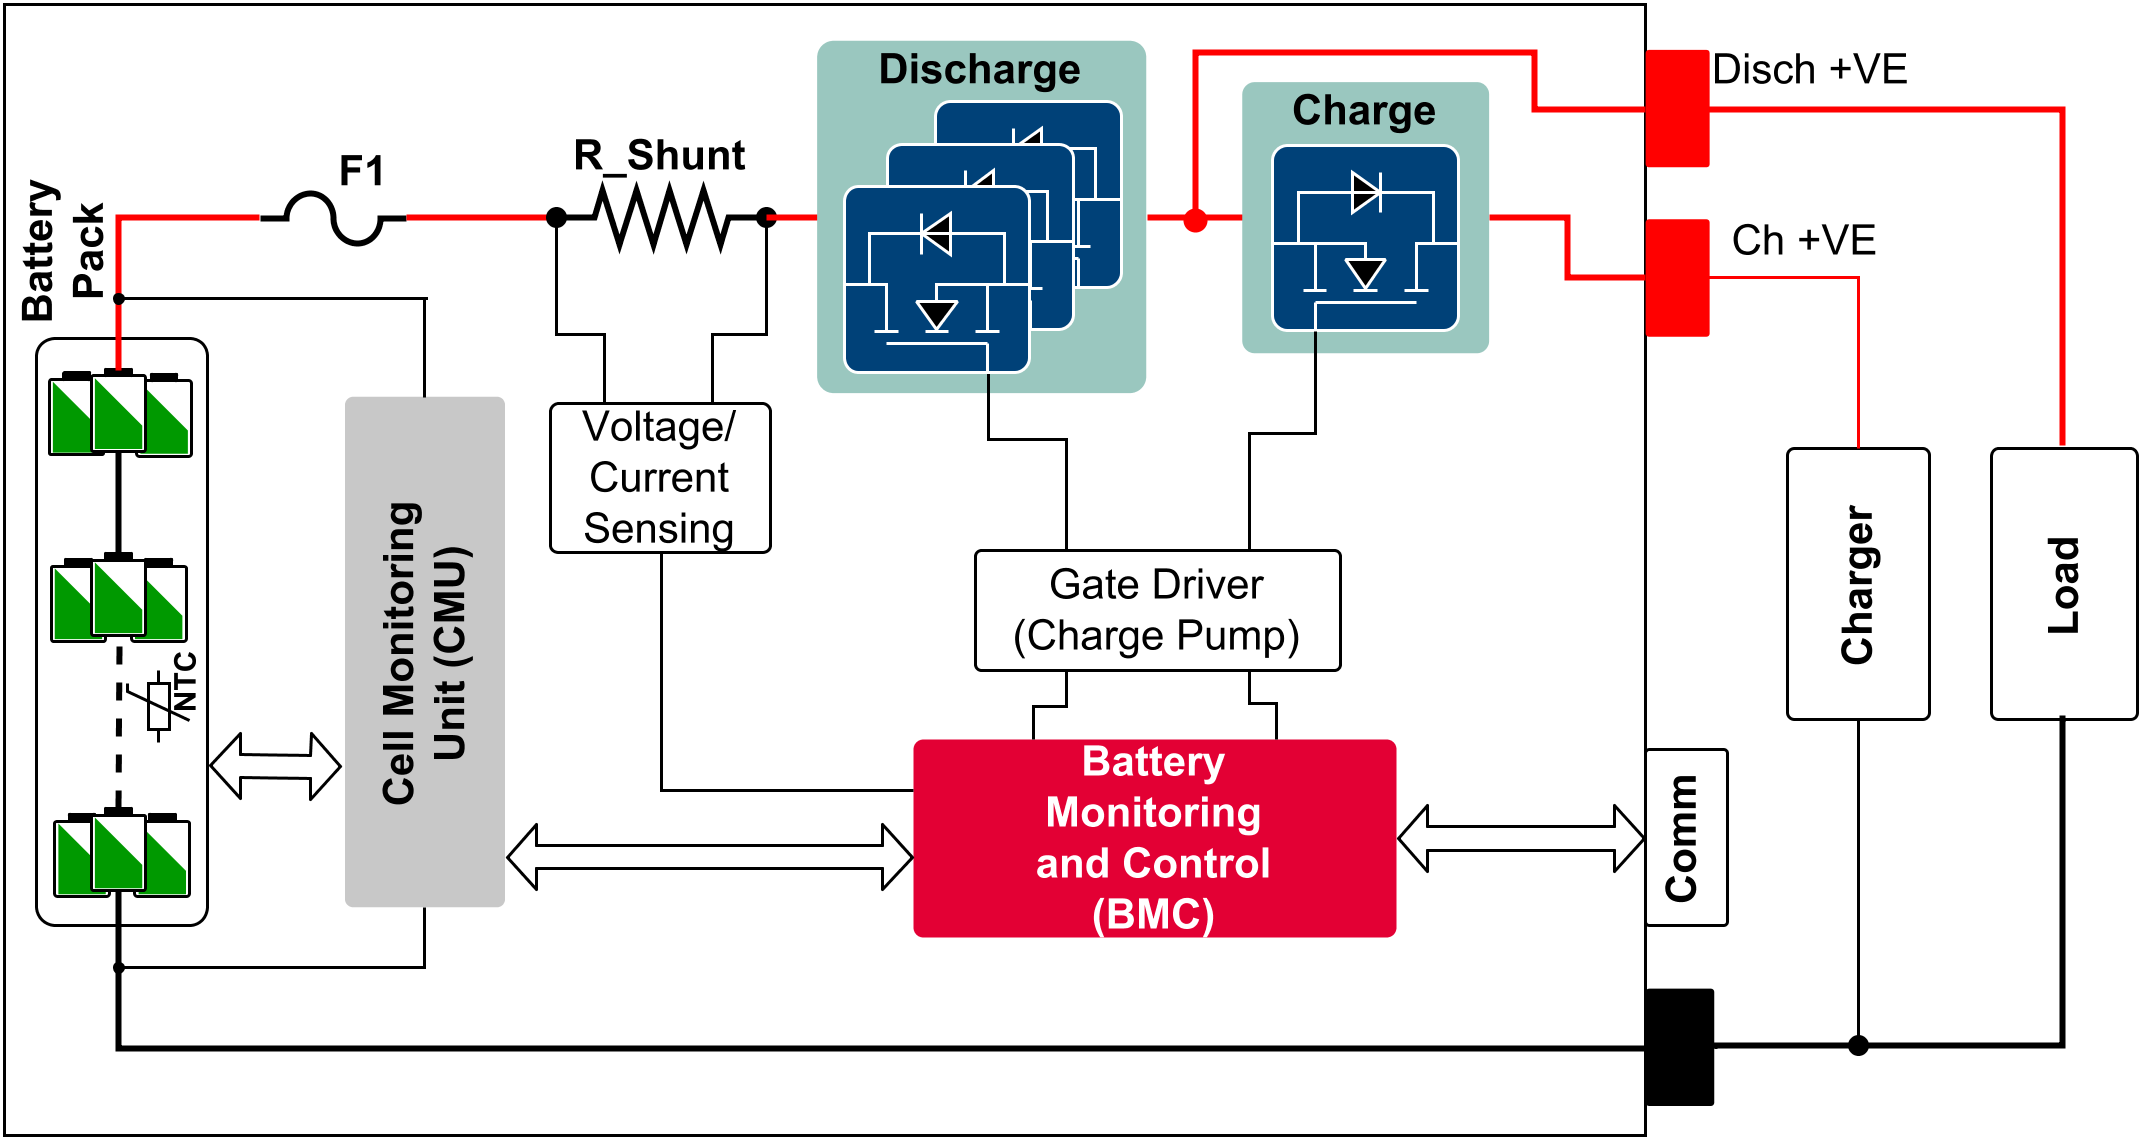 https://www.infineon.com/cms/_images/application/solutions/BMS-Separate-Charge-and-Discharge-Port-with-HS-Protection.PNG